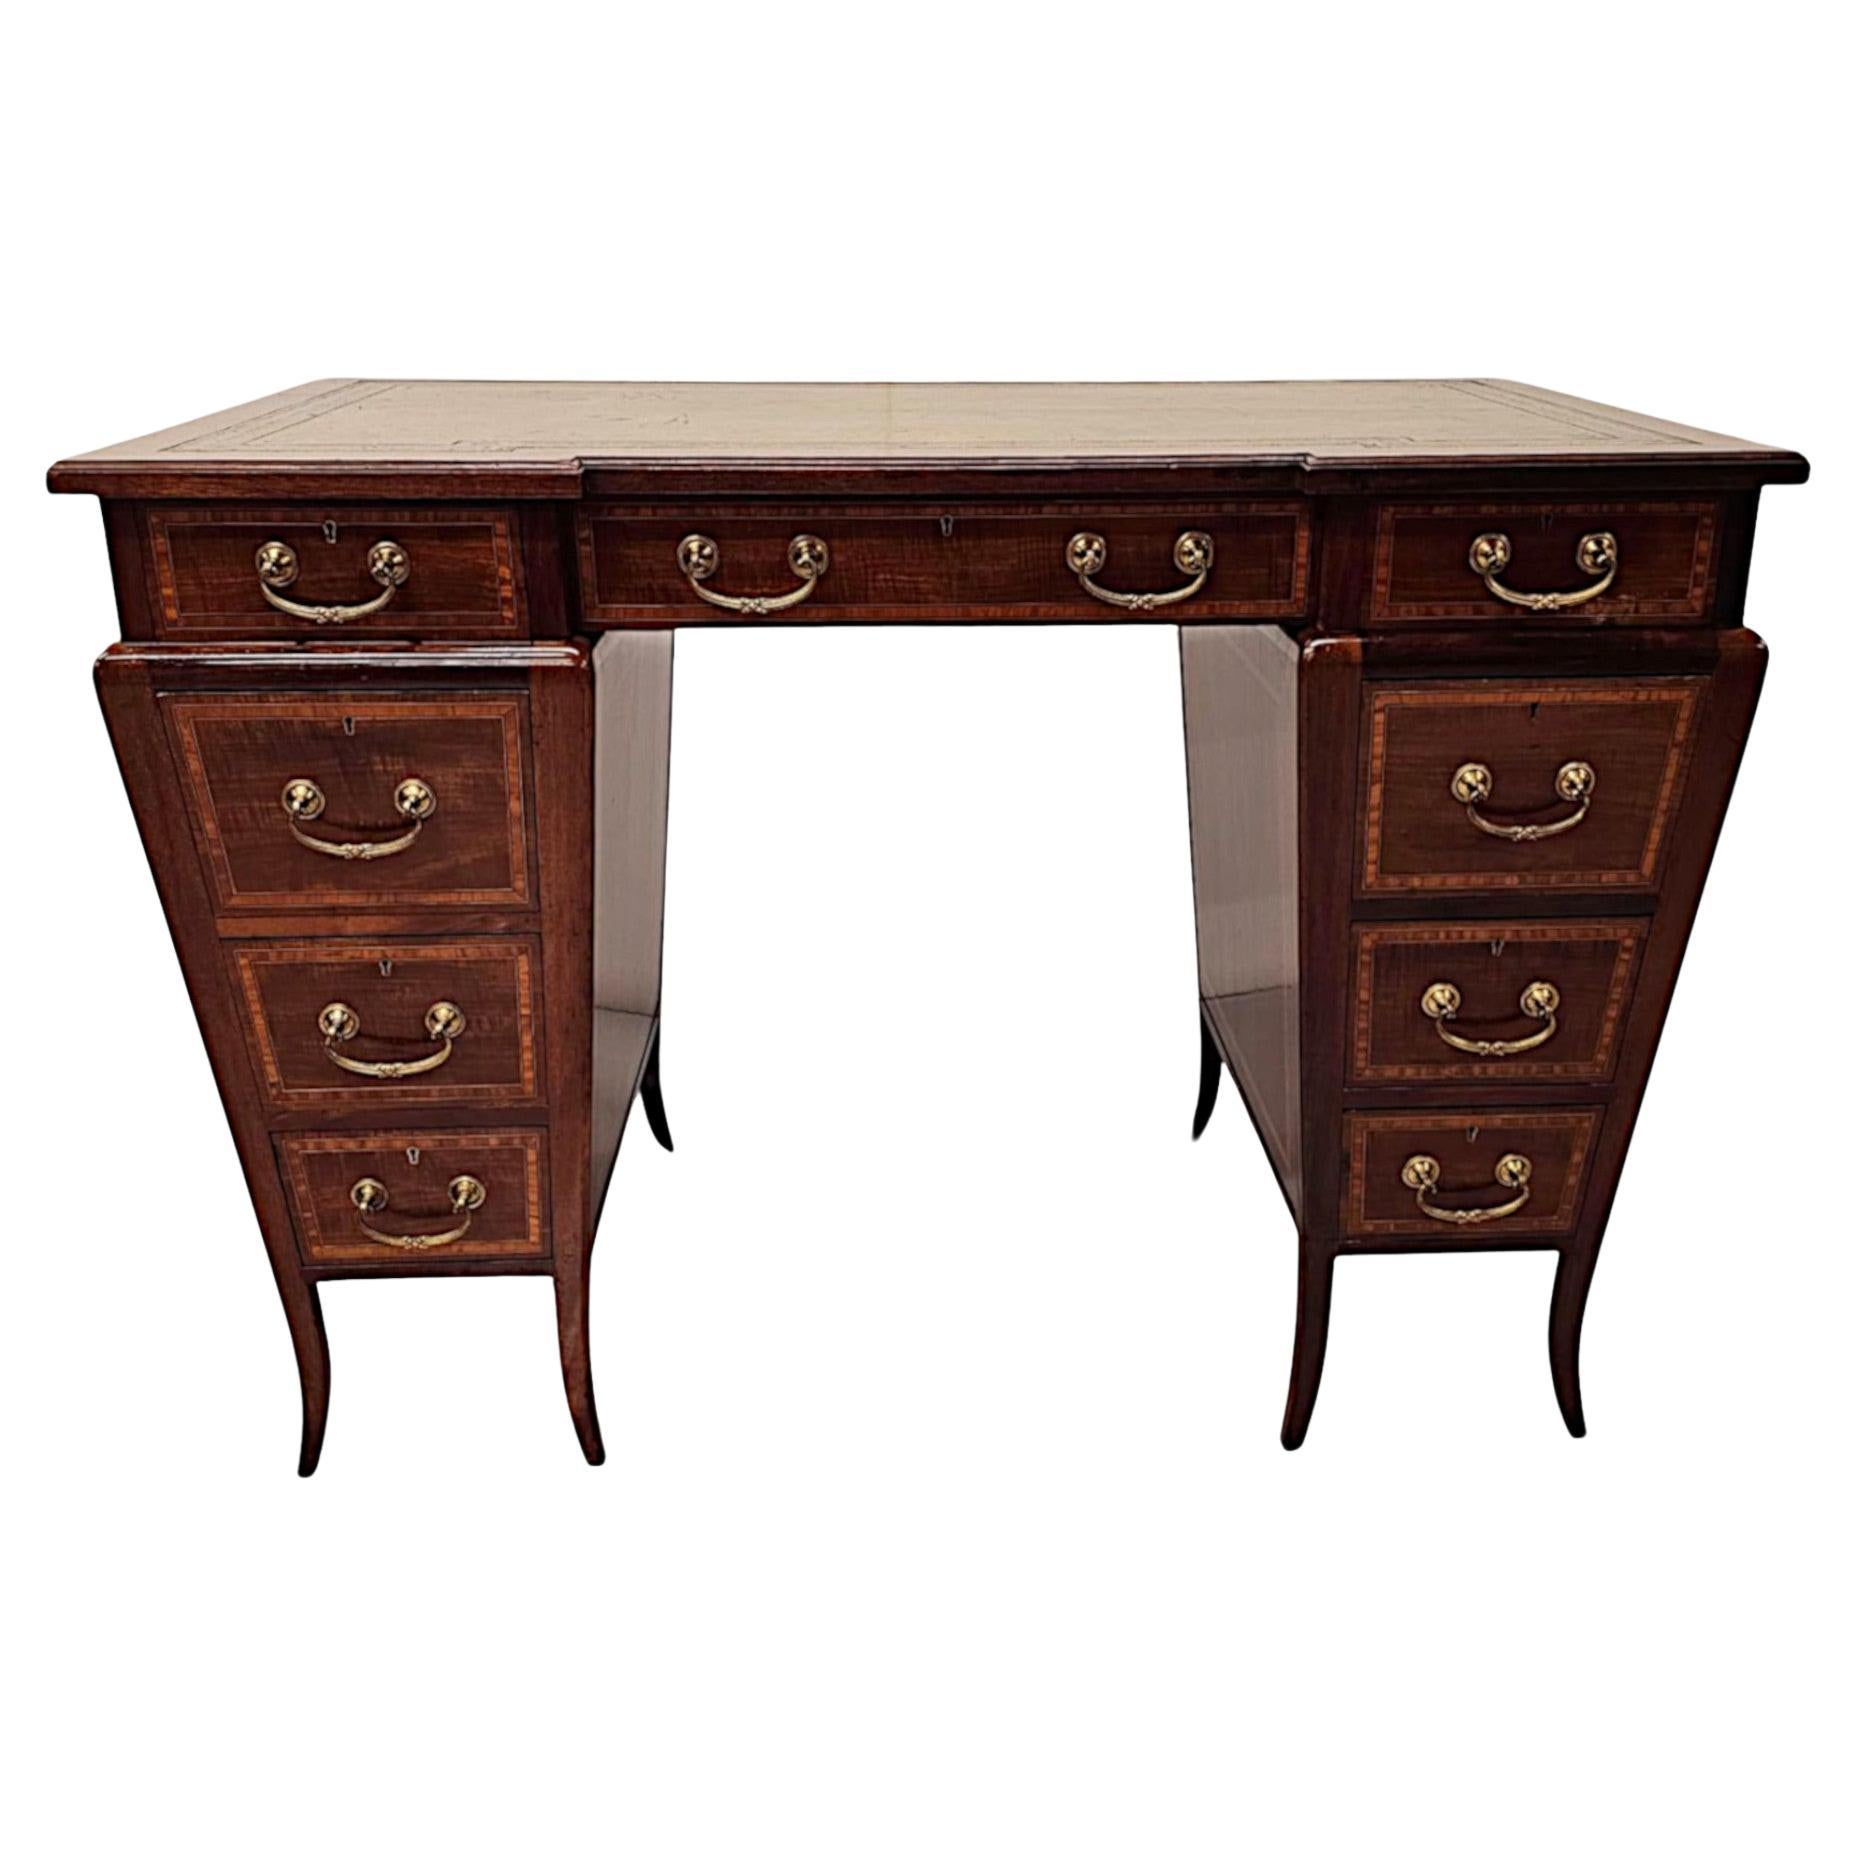 A Stunning Edwardian Leather Top Desk after Edward and Roberts For Sale